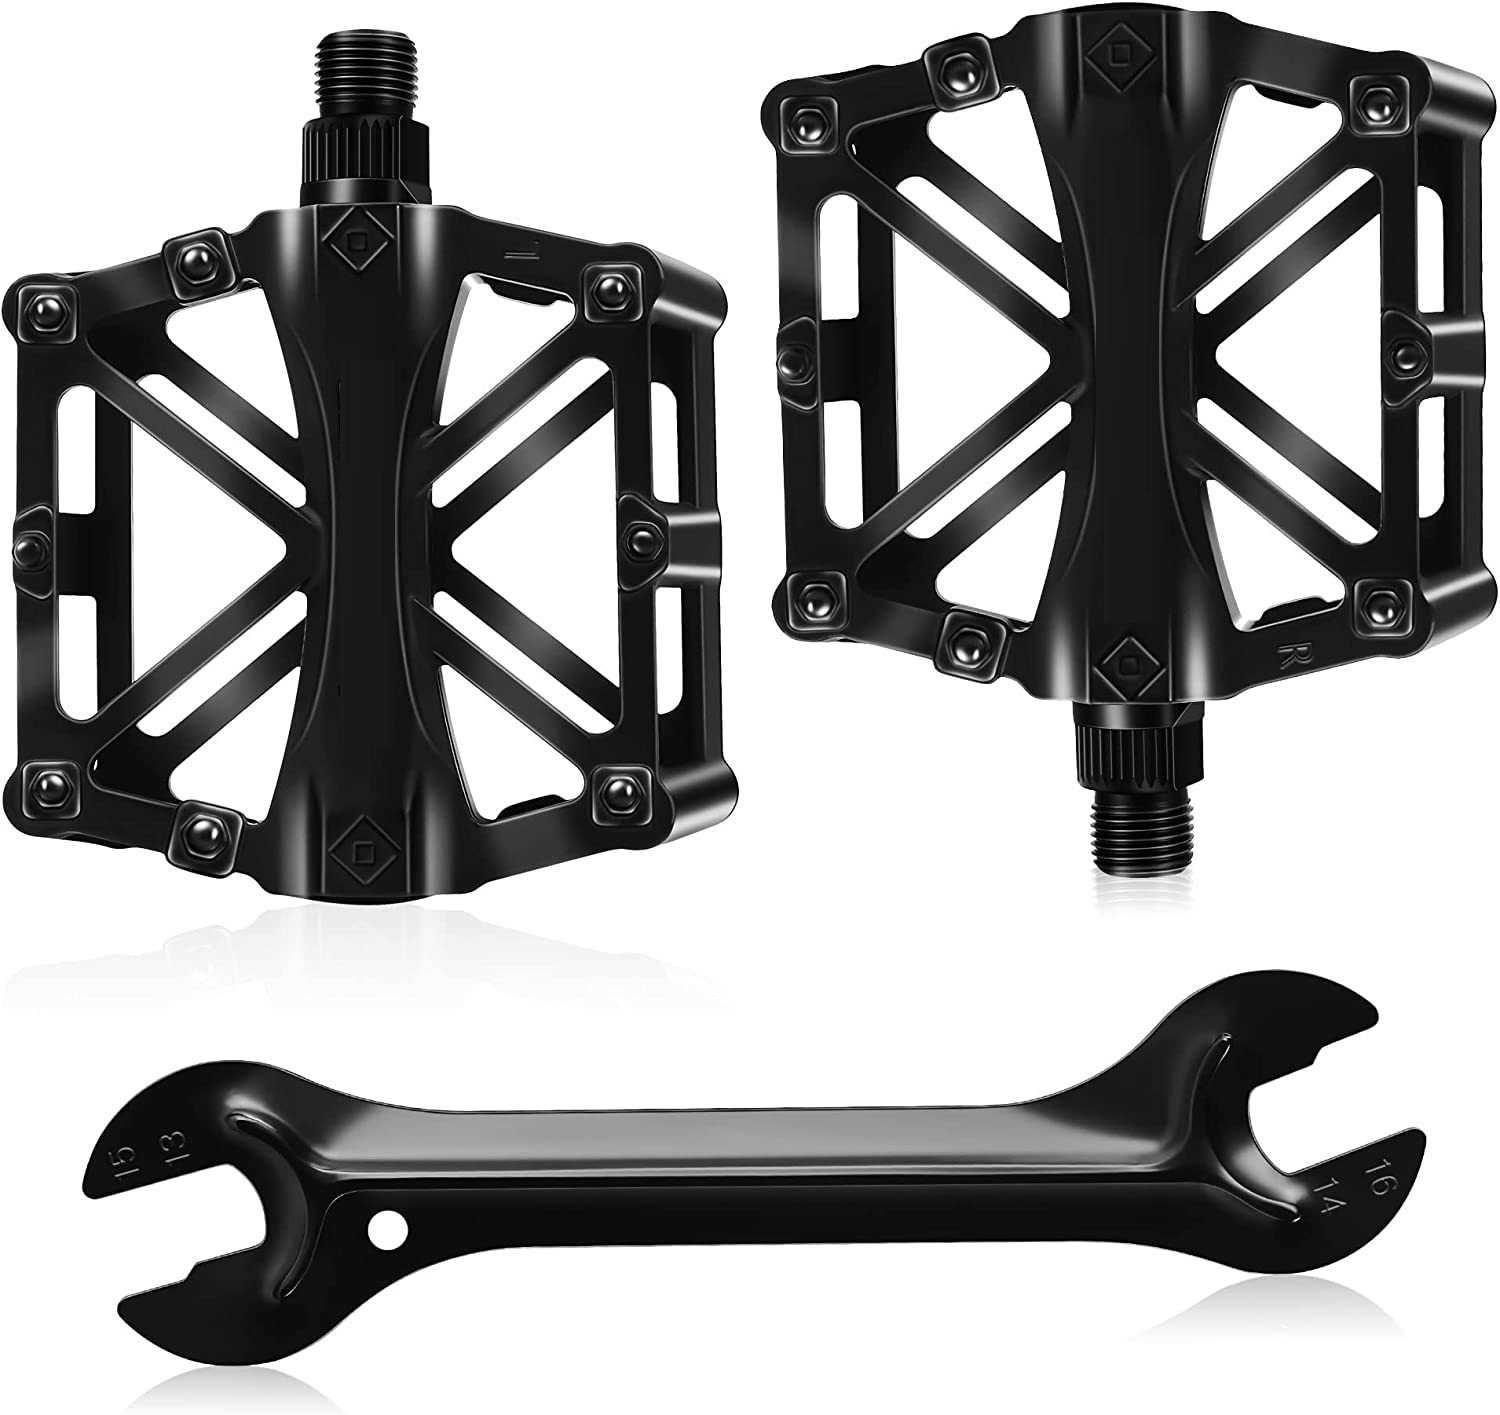 9/16” Black Pair Of Bicycle Mountain Bike MTB BMX Cycling Bearing Alloy Flat Platform Pedals With Wrench